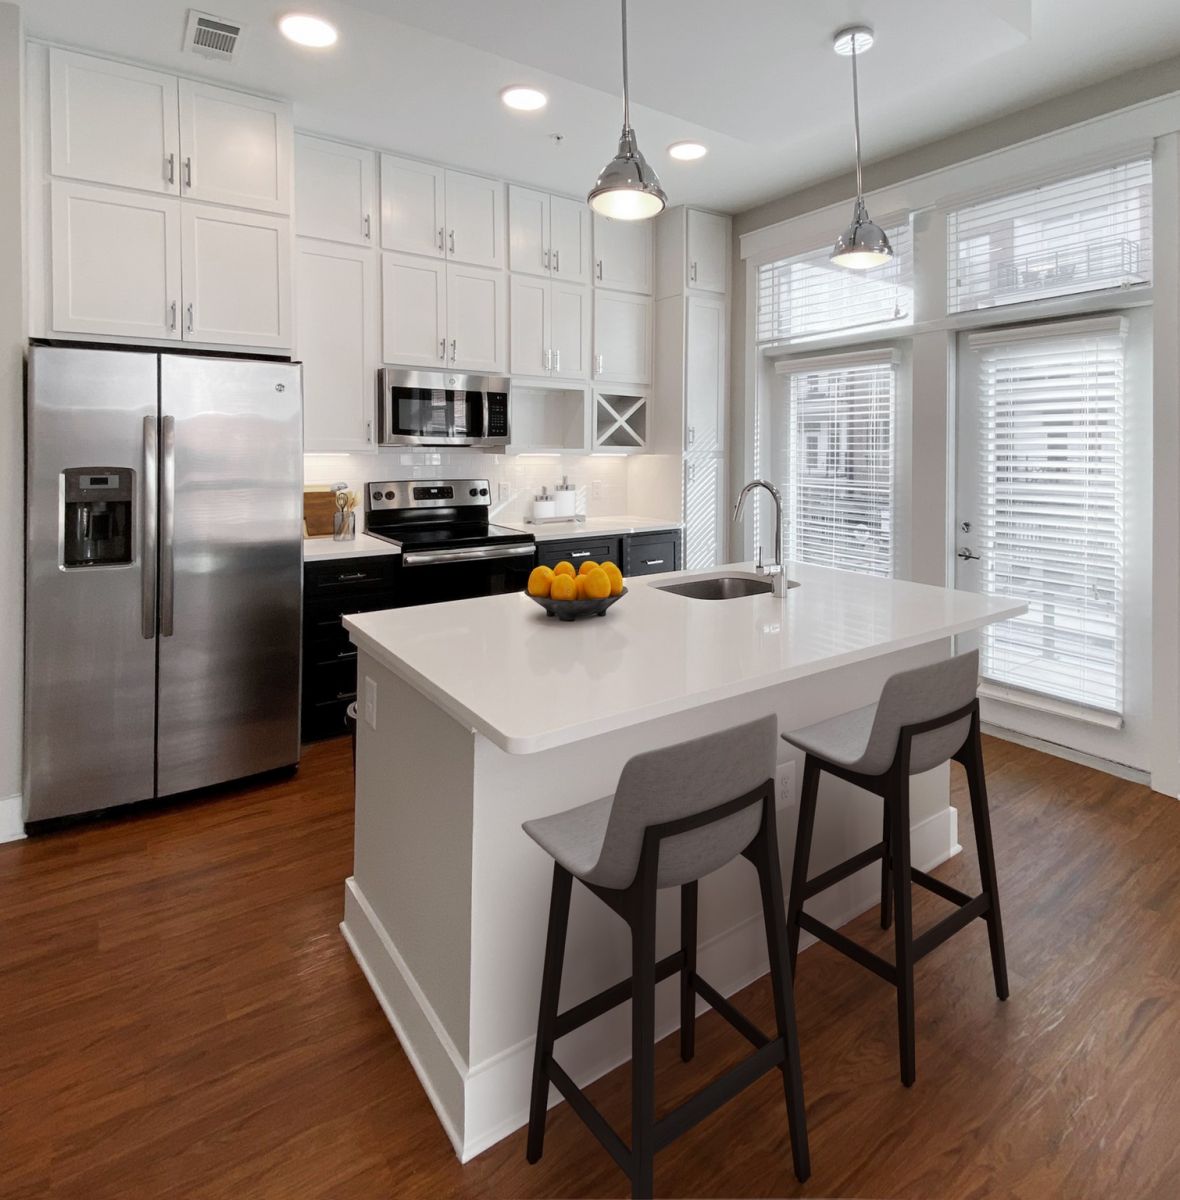 Providence Row apartment kitchen with island, stainless steel appliances, and beautiful finishes